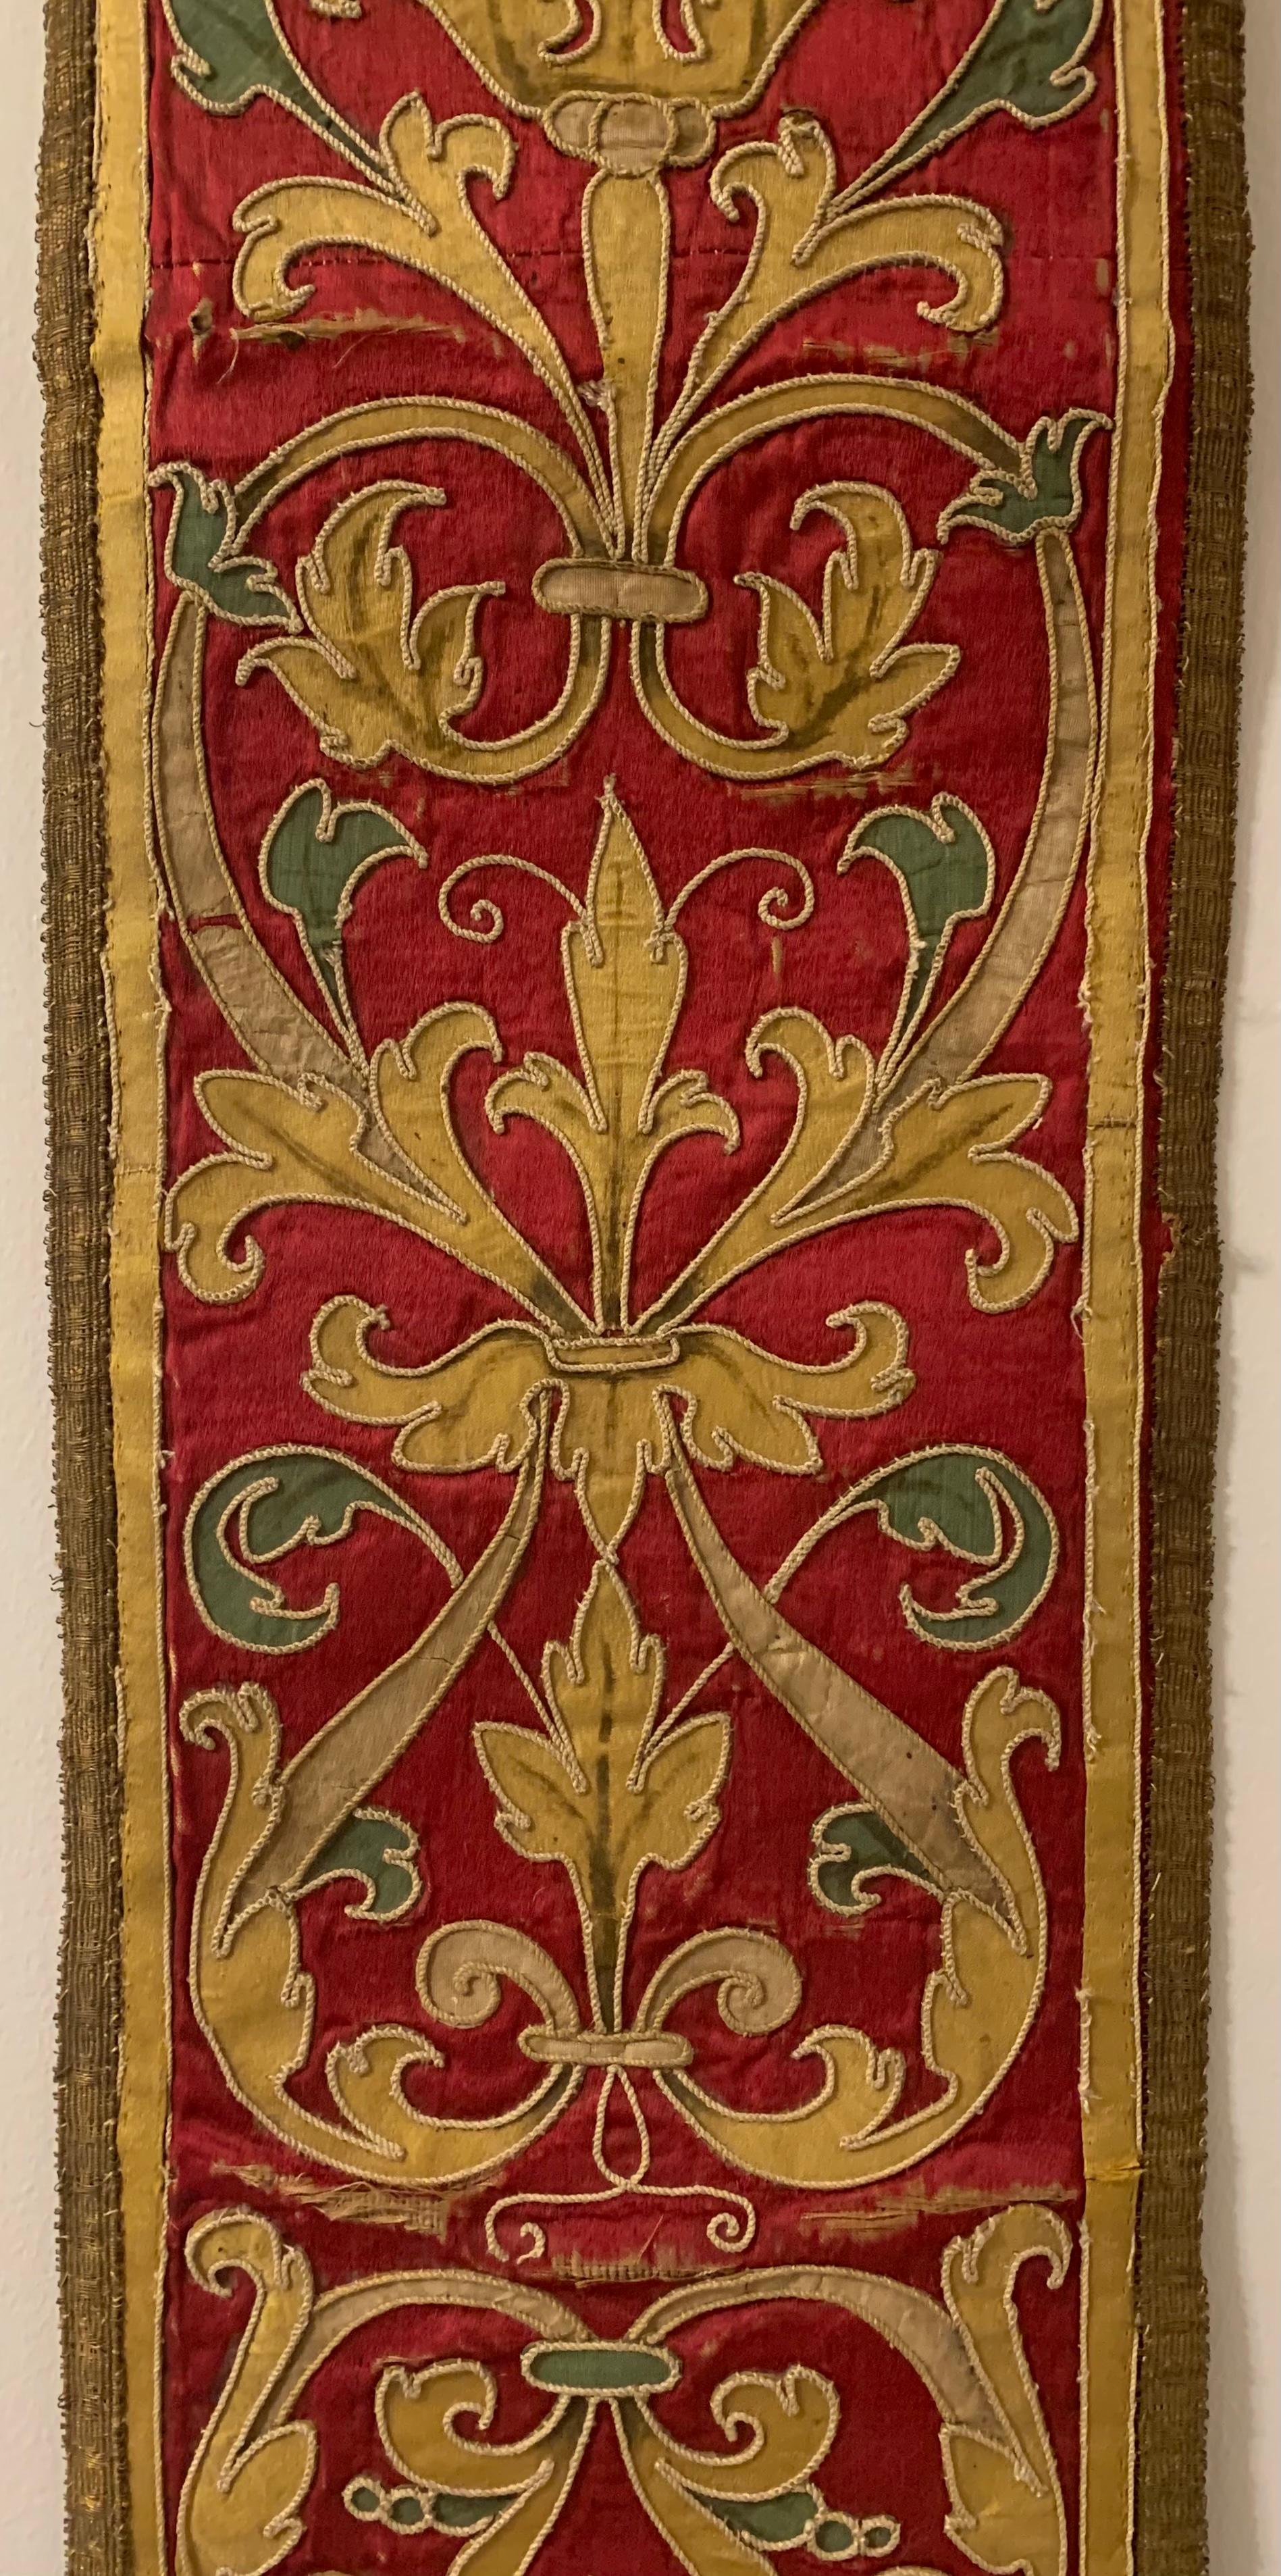 Hand-Crafted Antique 17th Century Baroque Italian Silk, Metallic Thread Embroidery Panel For Sale